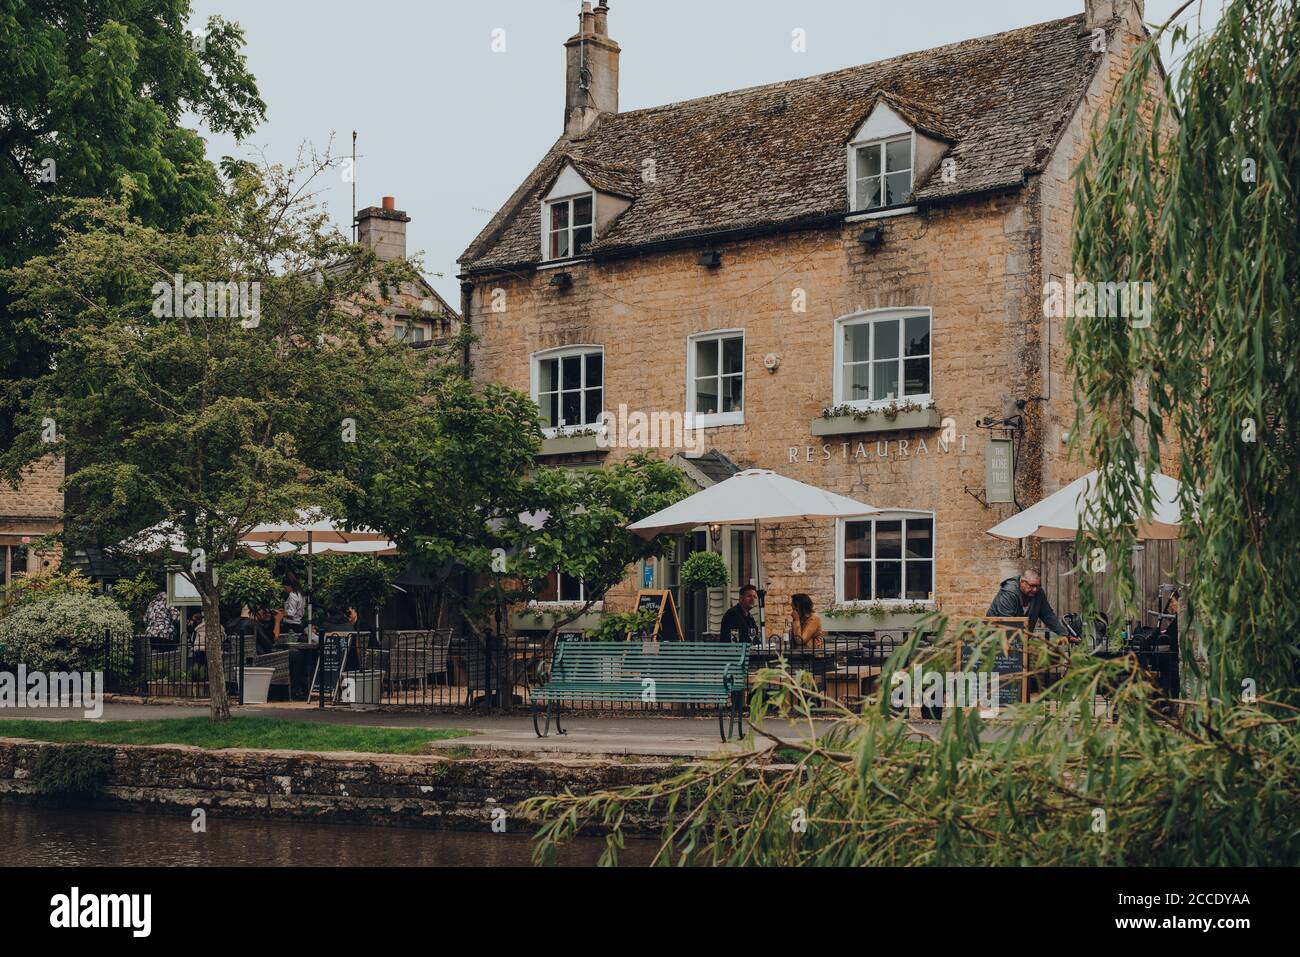 Bourton-on-the-Water, UK - July 12 2020: People at the outdoor tables of The Rose Tree Restaurant by River Windrush in Bourton-on-the-Water, a famous Stock Photo